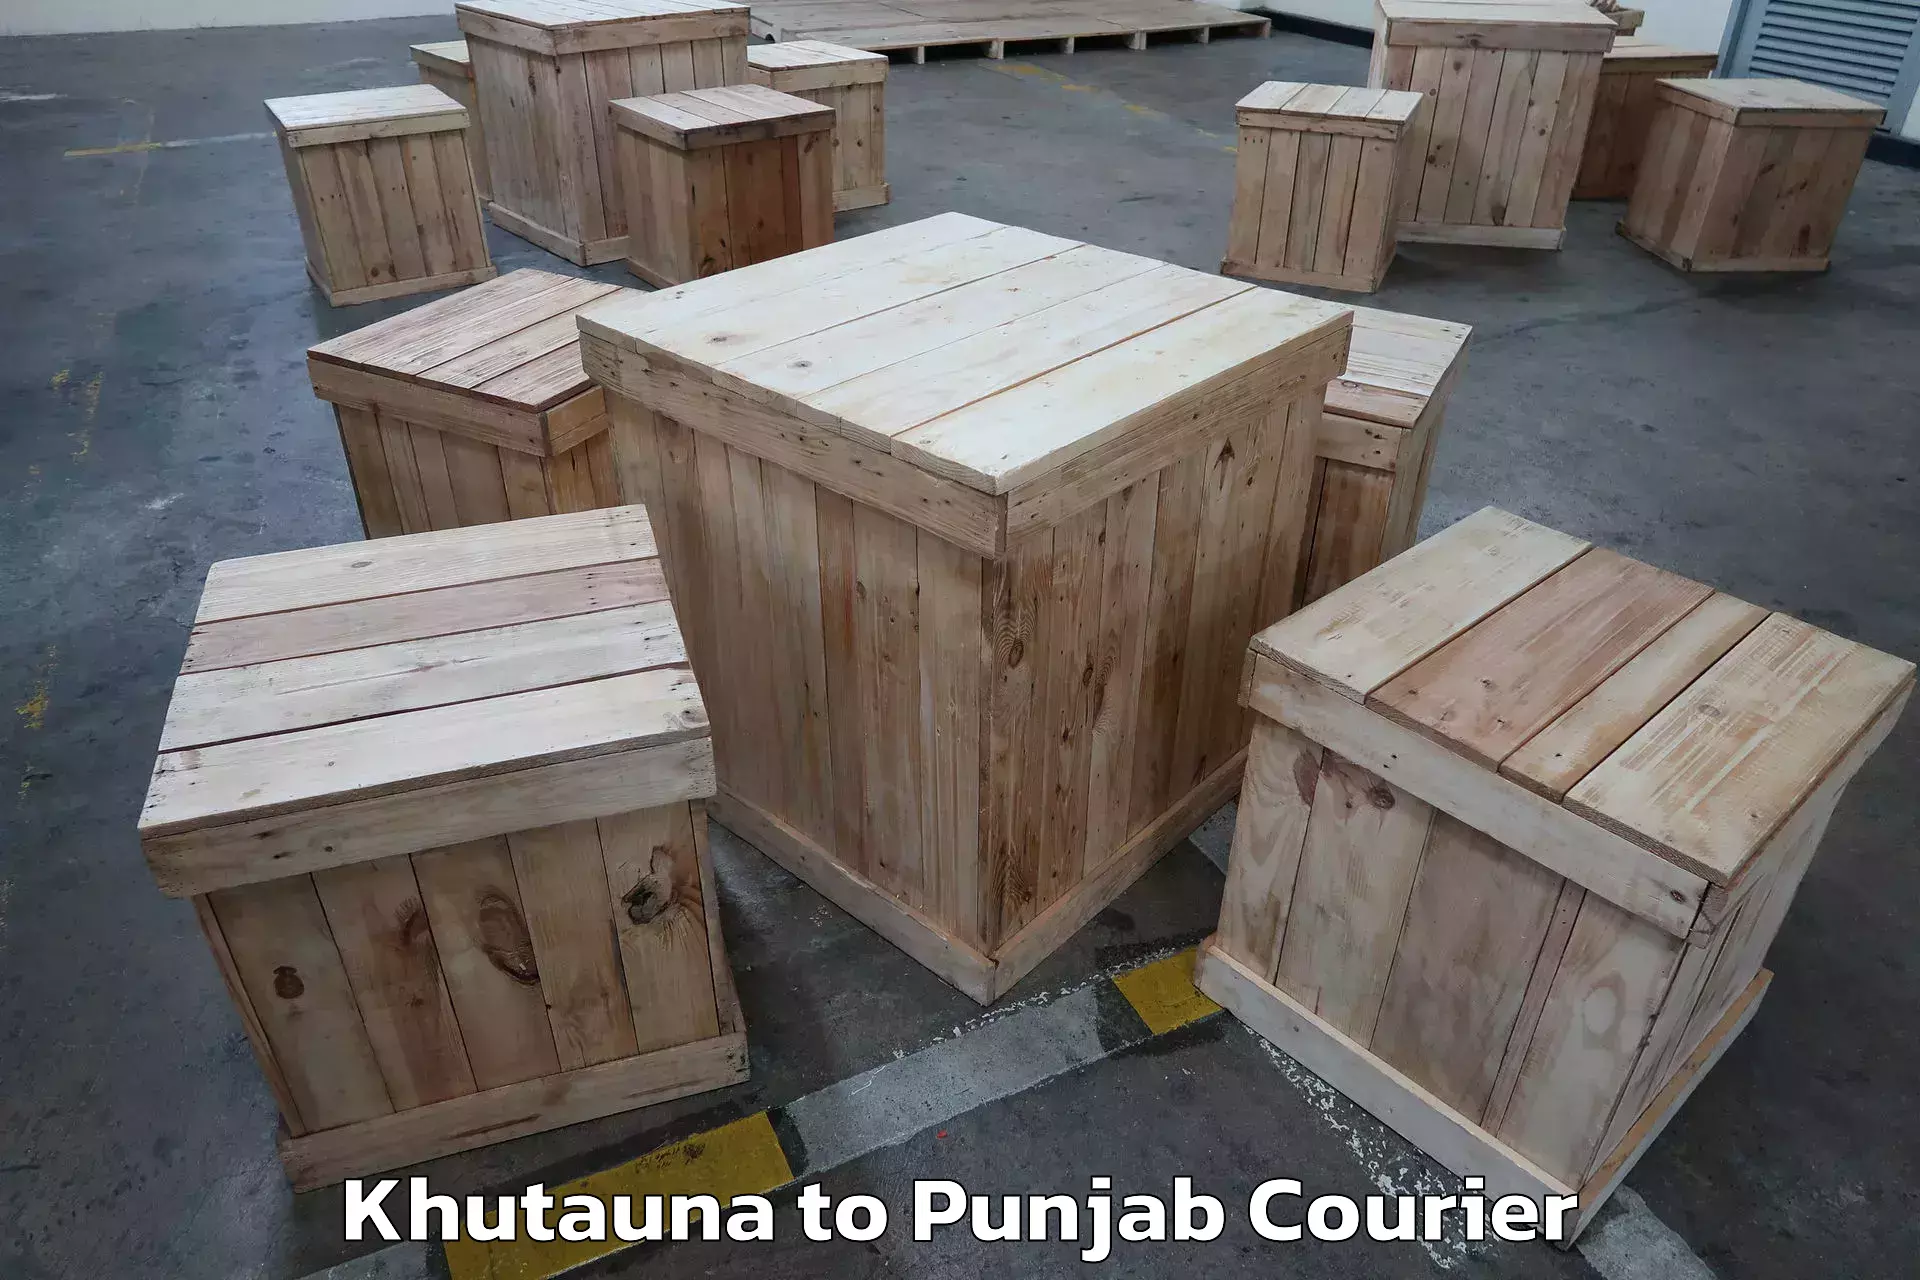 Trusted relocation experts Khutauna to Punjab